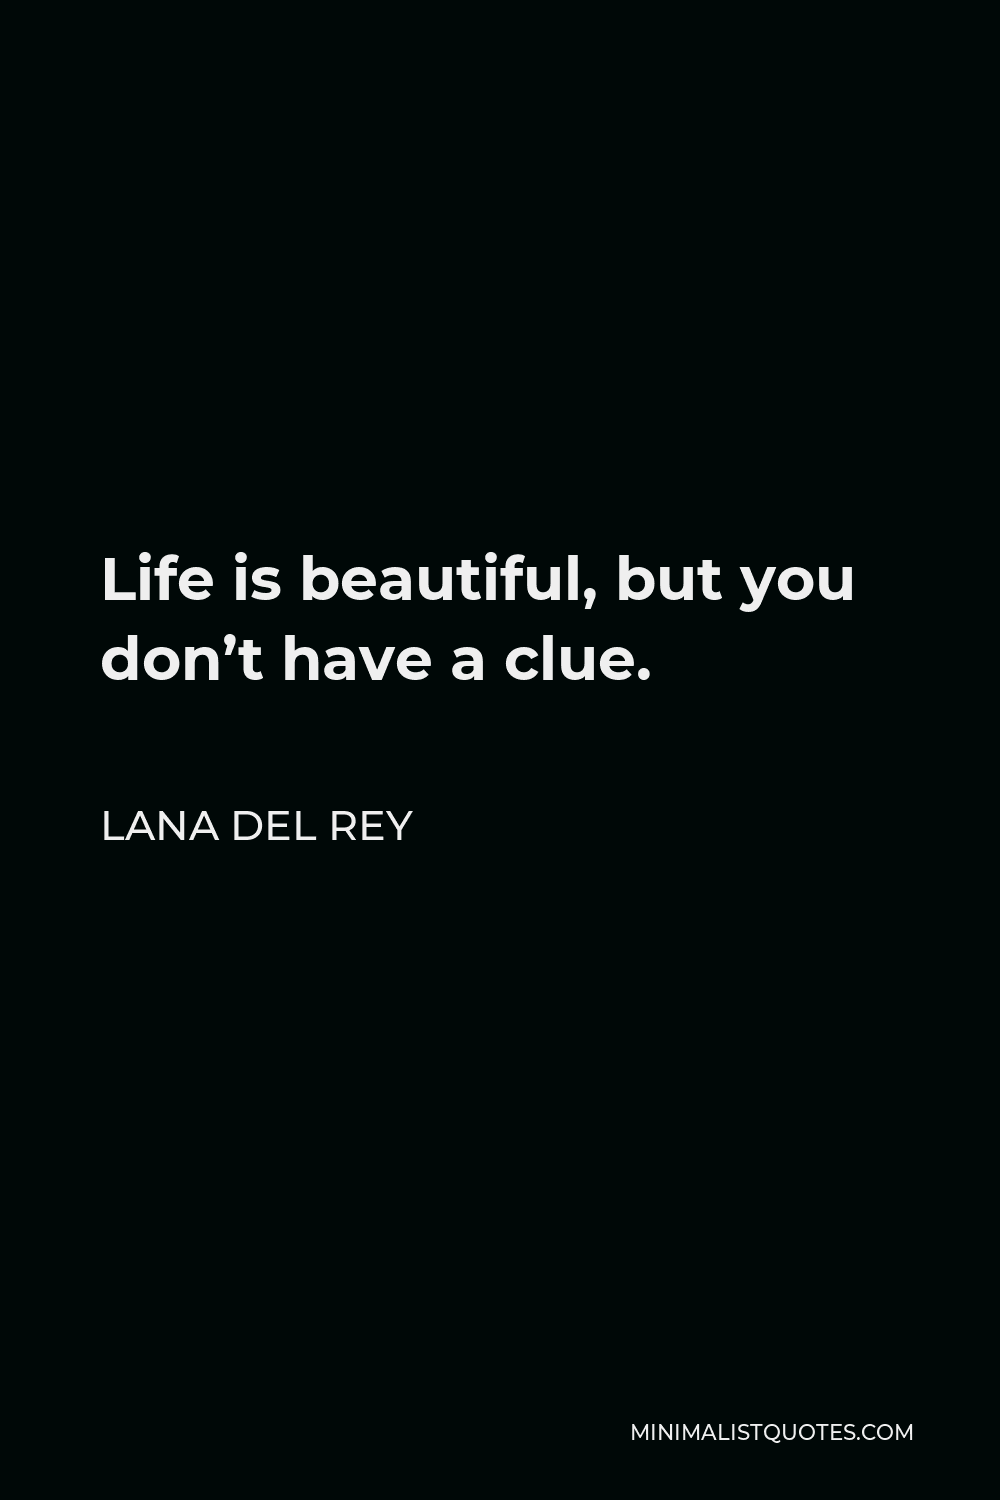 Lana Del Rey Quote - Life is beautiful, but you don’t have a clue.